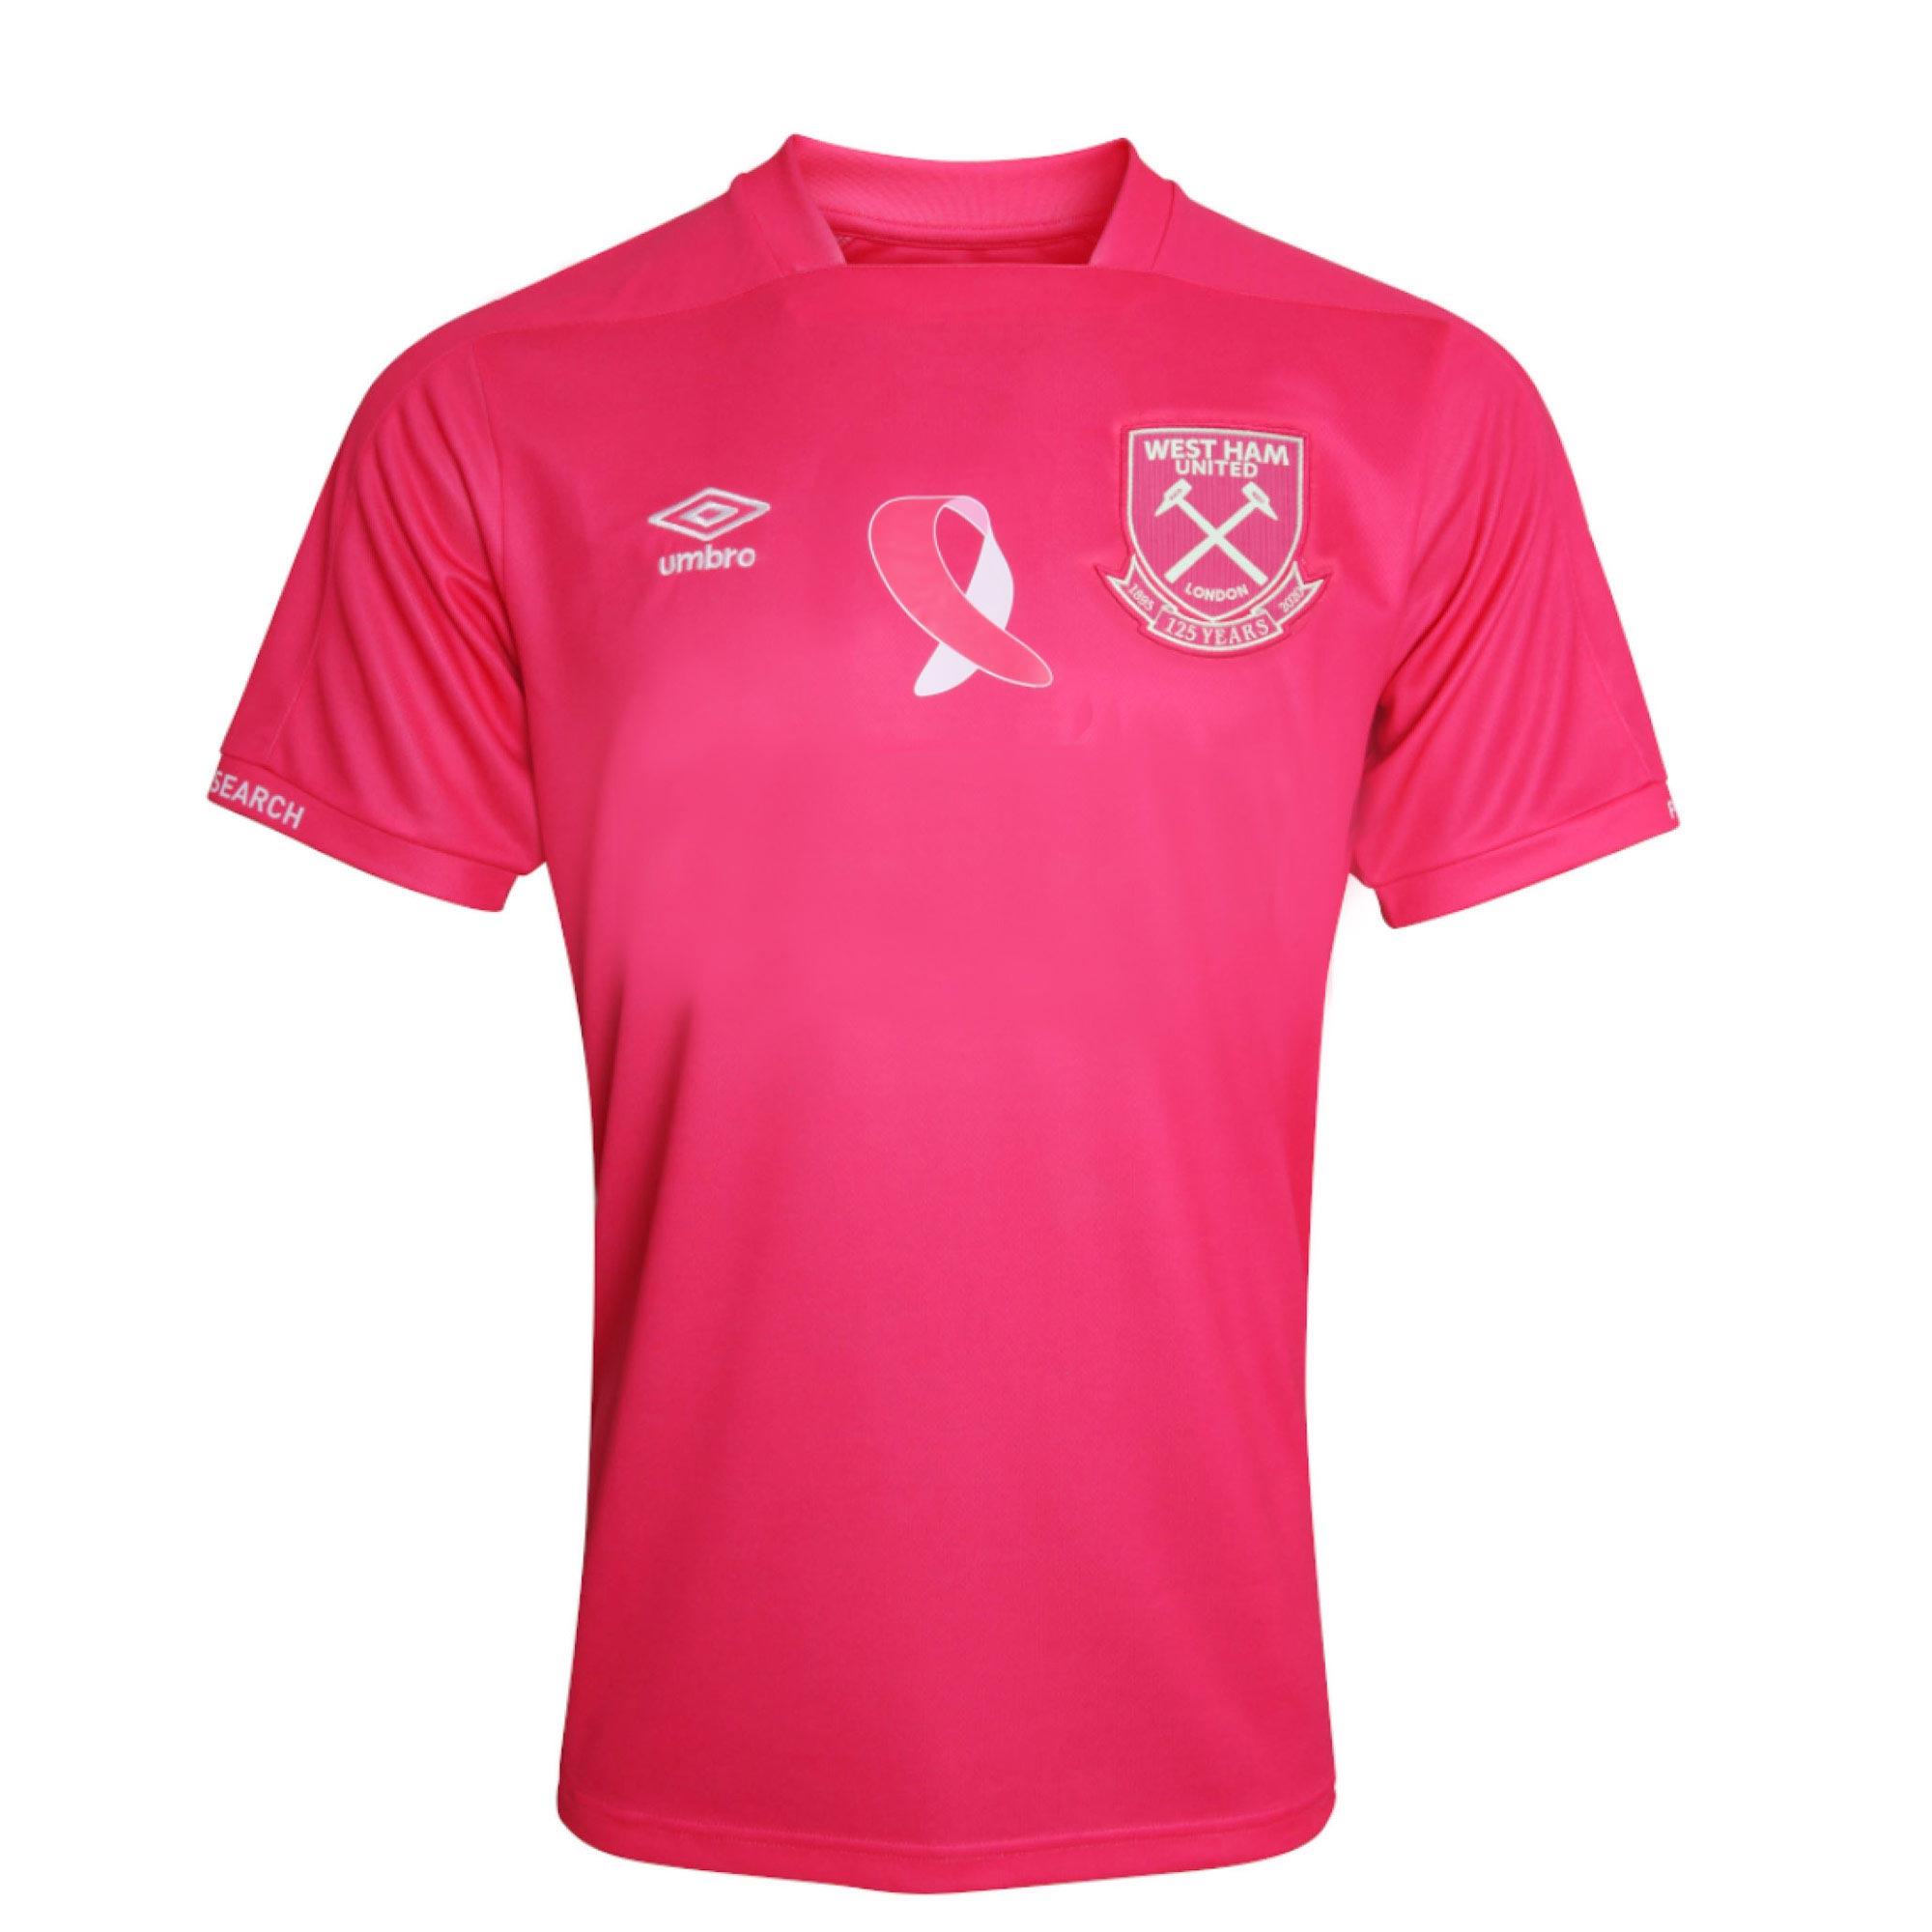 Whu X Breast Cancer Now 20/21 Under 18 Shirt PINK